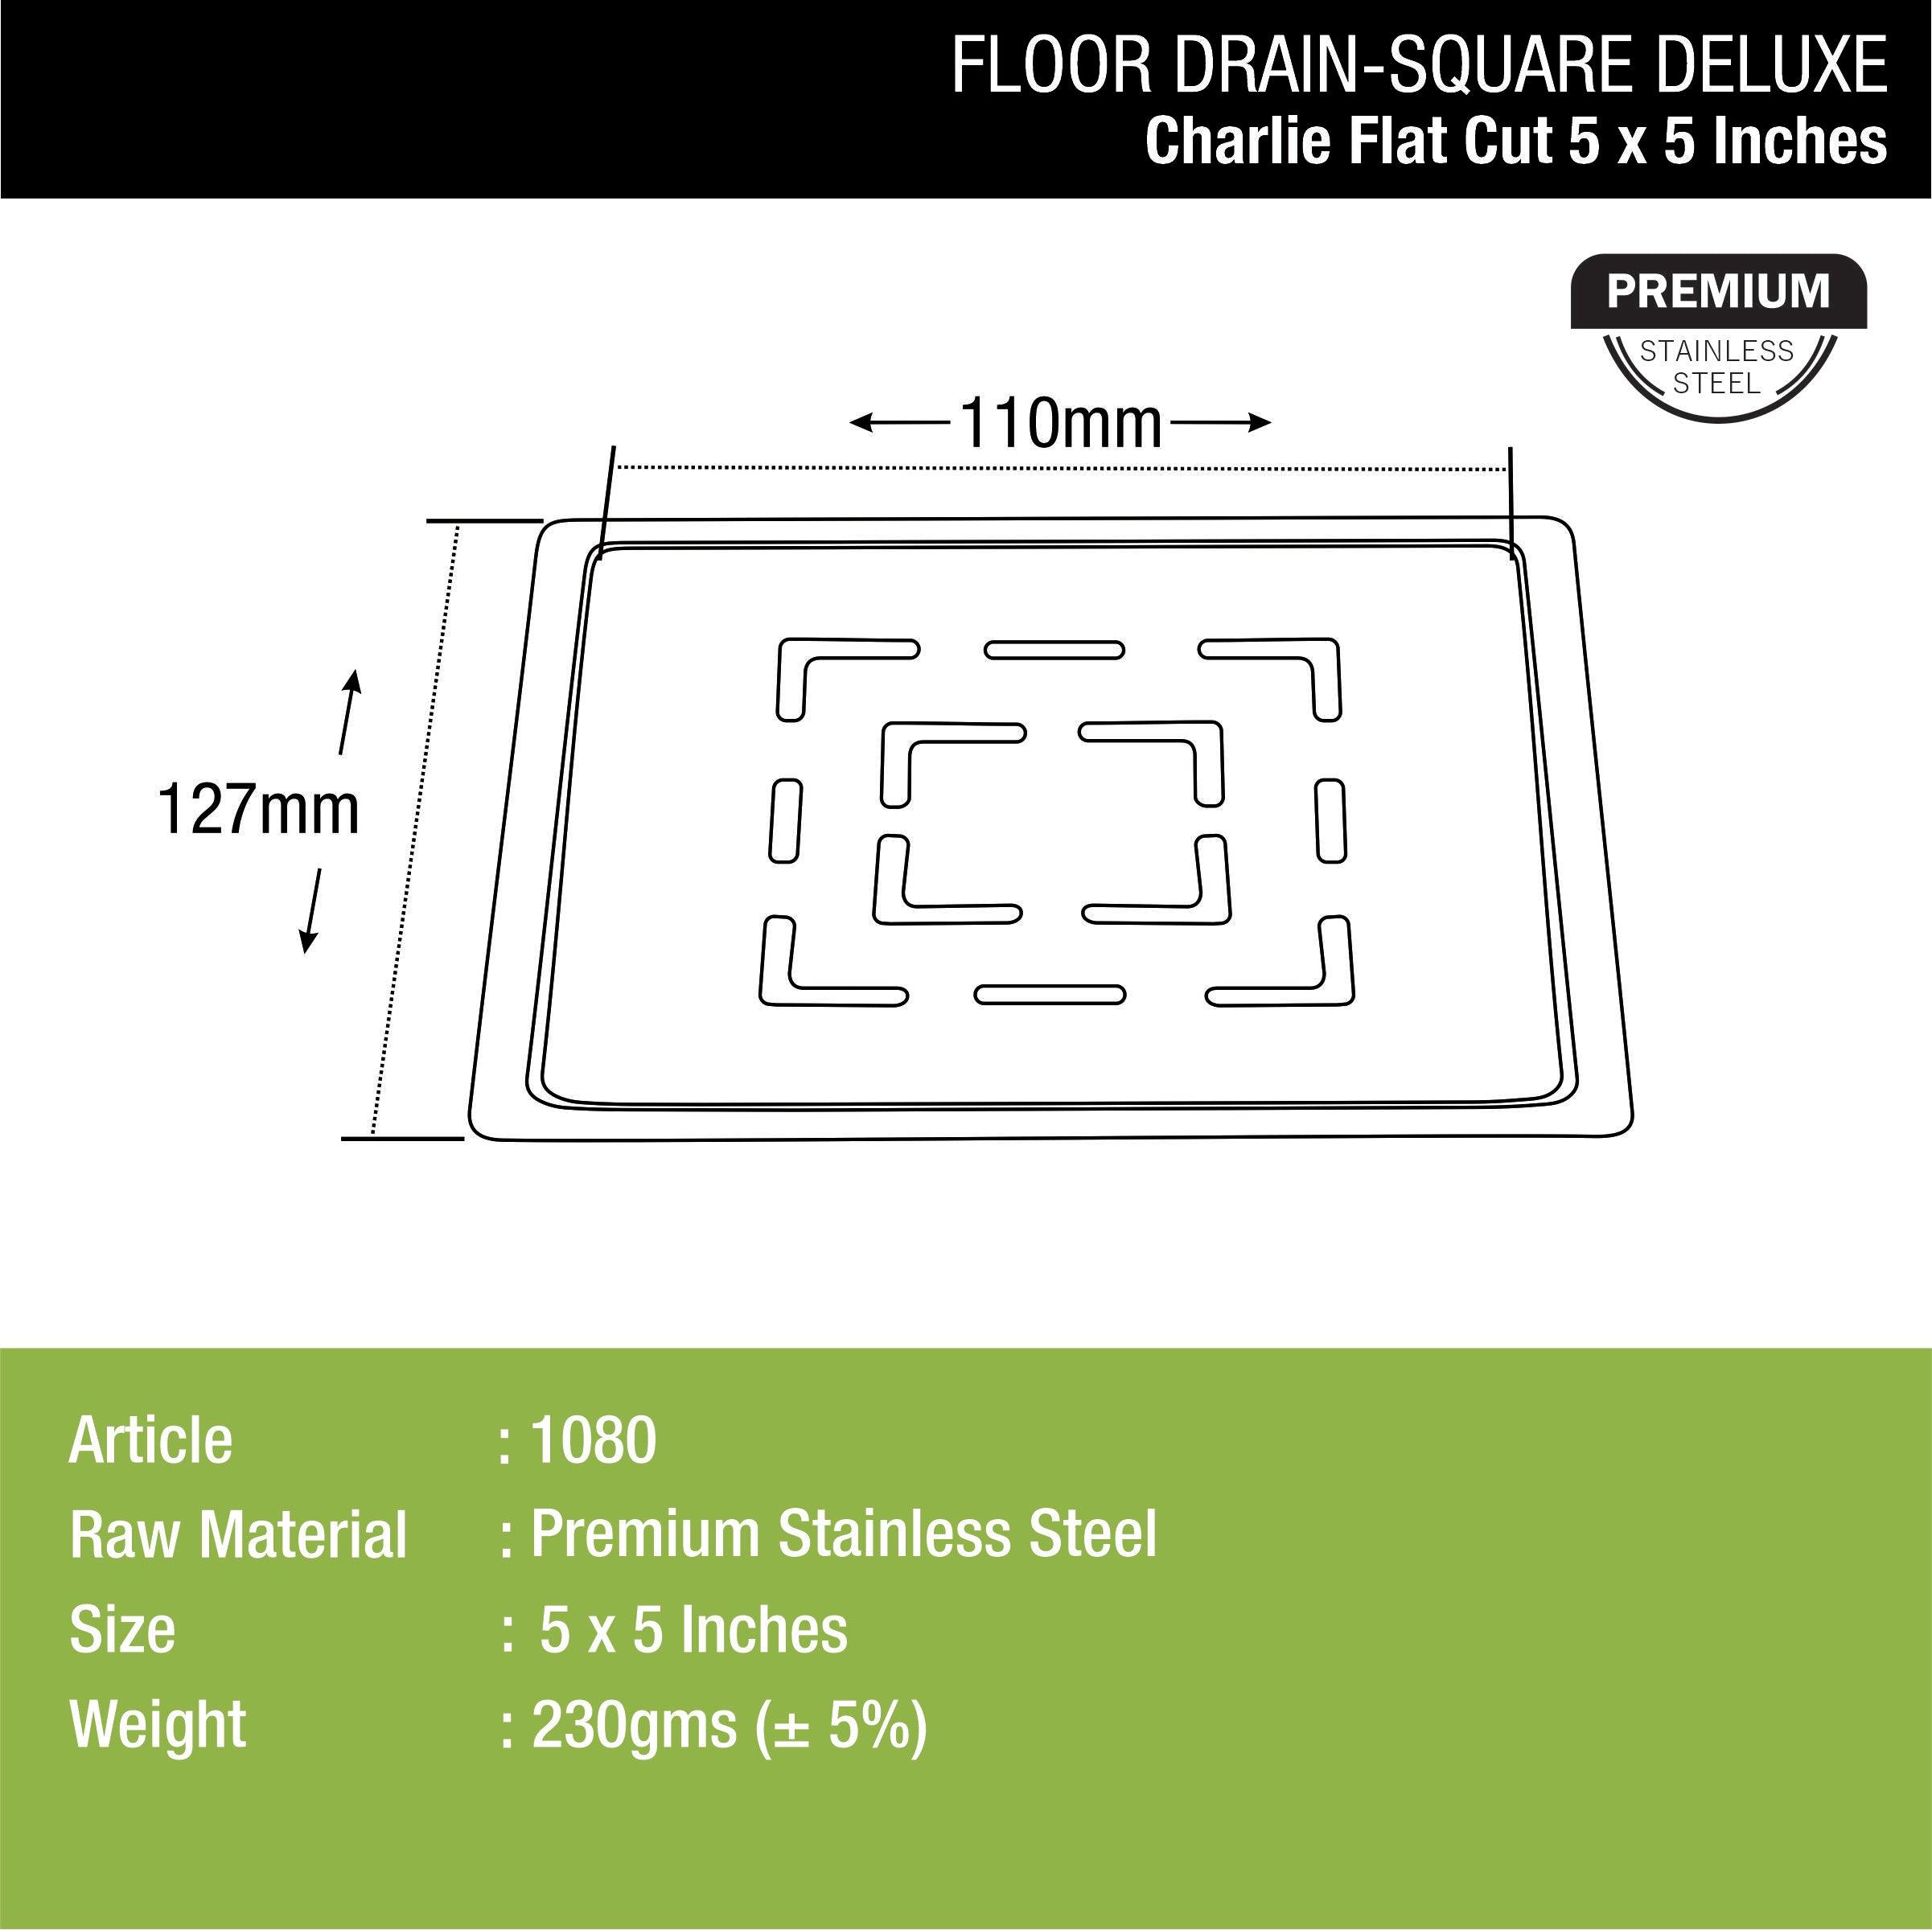 Charlie Deluxe Square Flat Cut Floor Drain (5 x 5 Inches) sizes and dimensions